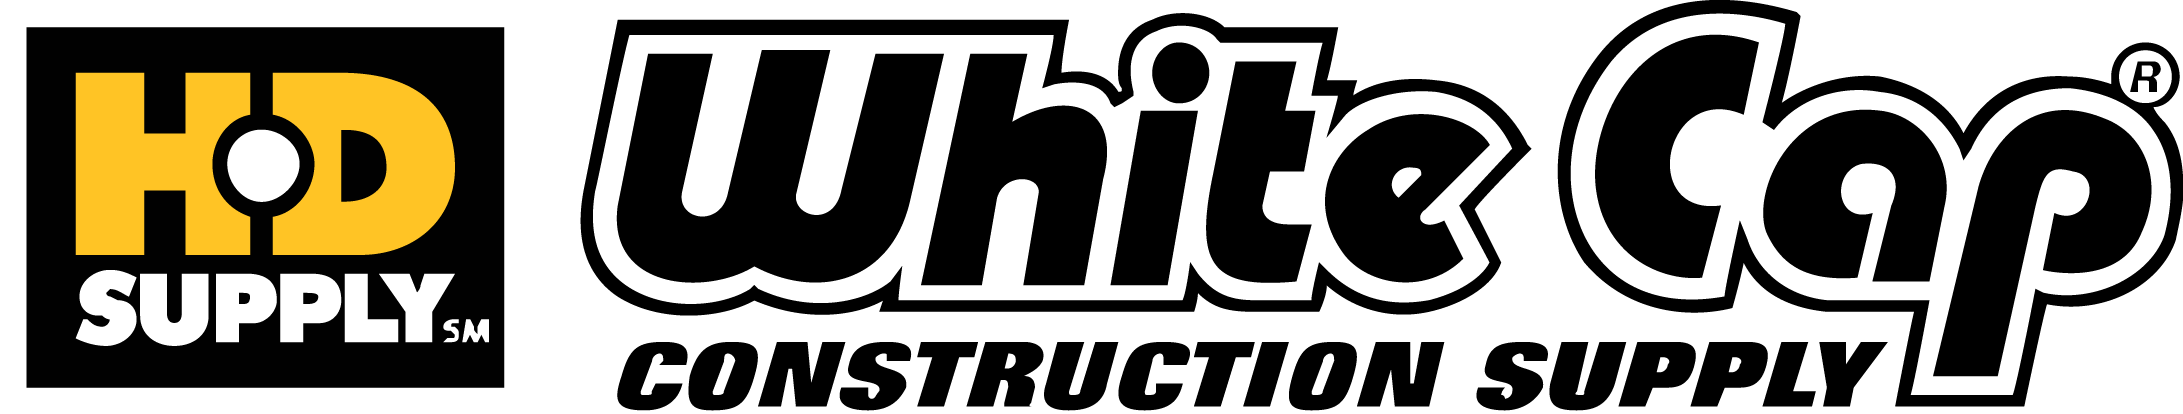 White Cap Construction Logo - White Cap Construction Supply 1 Growth Equity